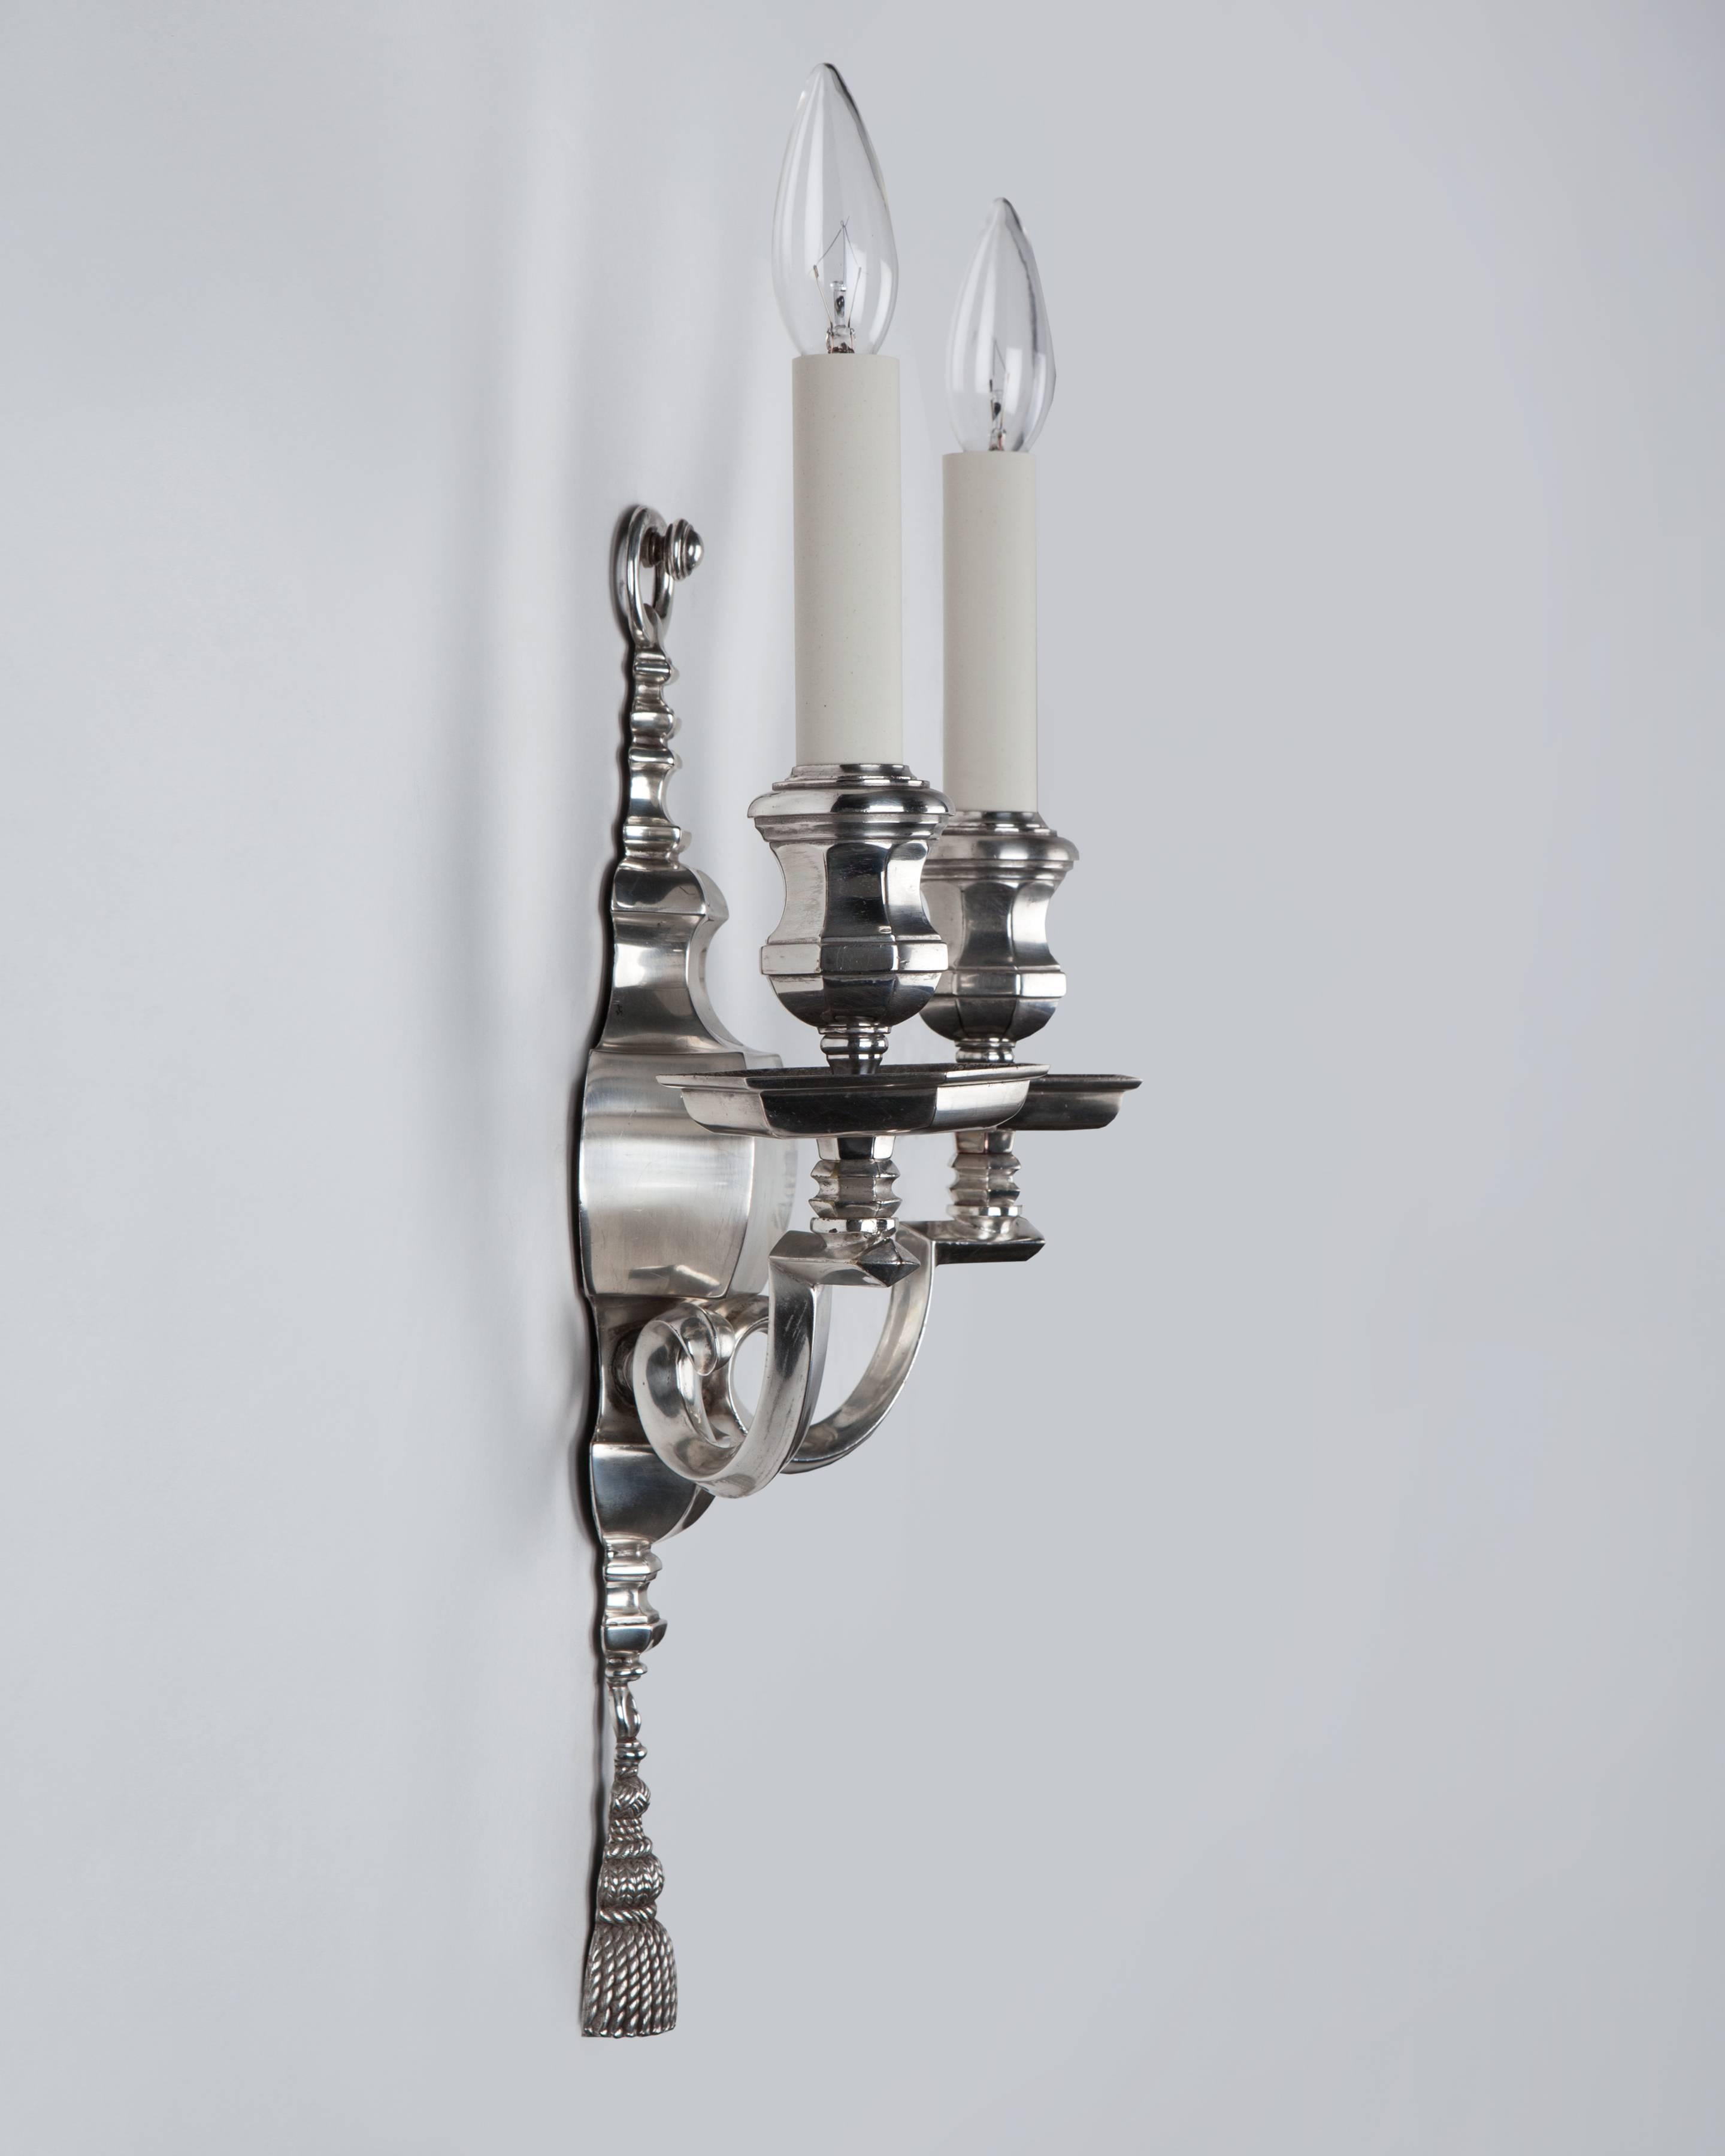 AIS3042
A pair of antique double-light sconces in their original silver plate over bronze finish with bold, faceted ware-form back plates and cups, and diamond section arms.

Dimensions:
Overall: 17-1/4